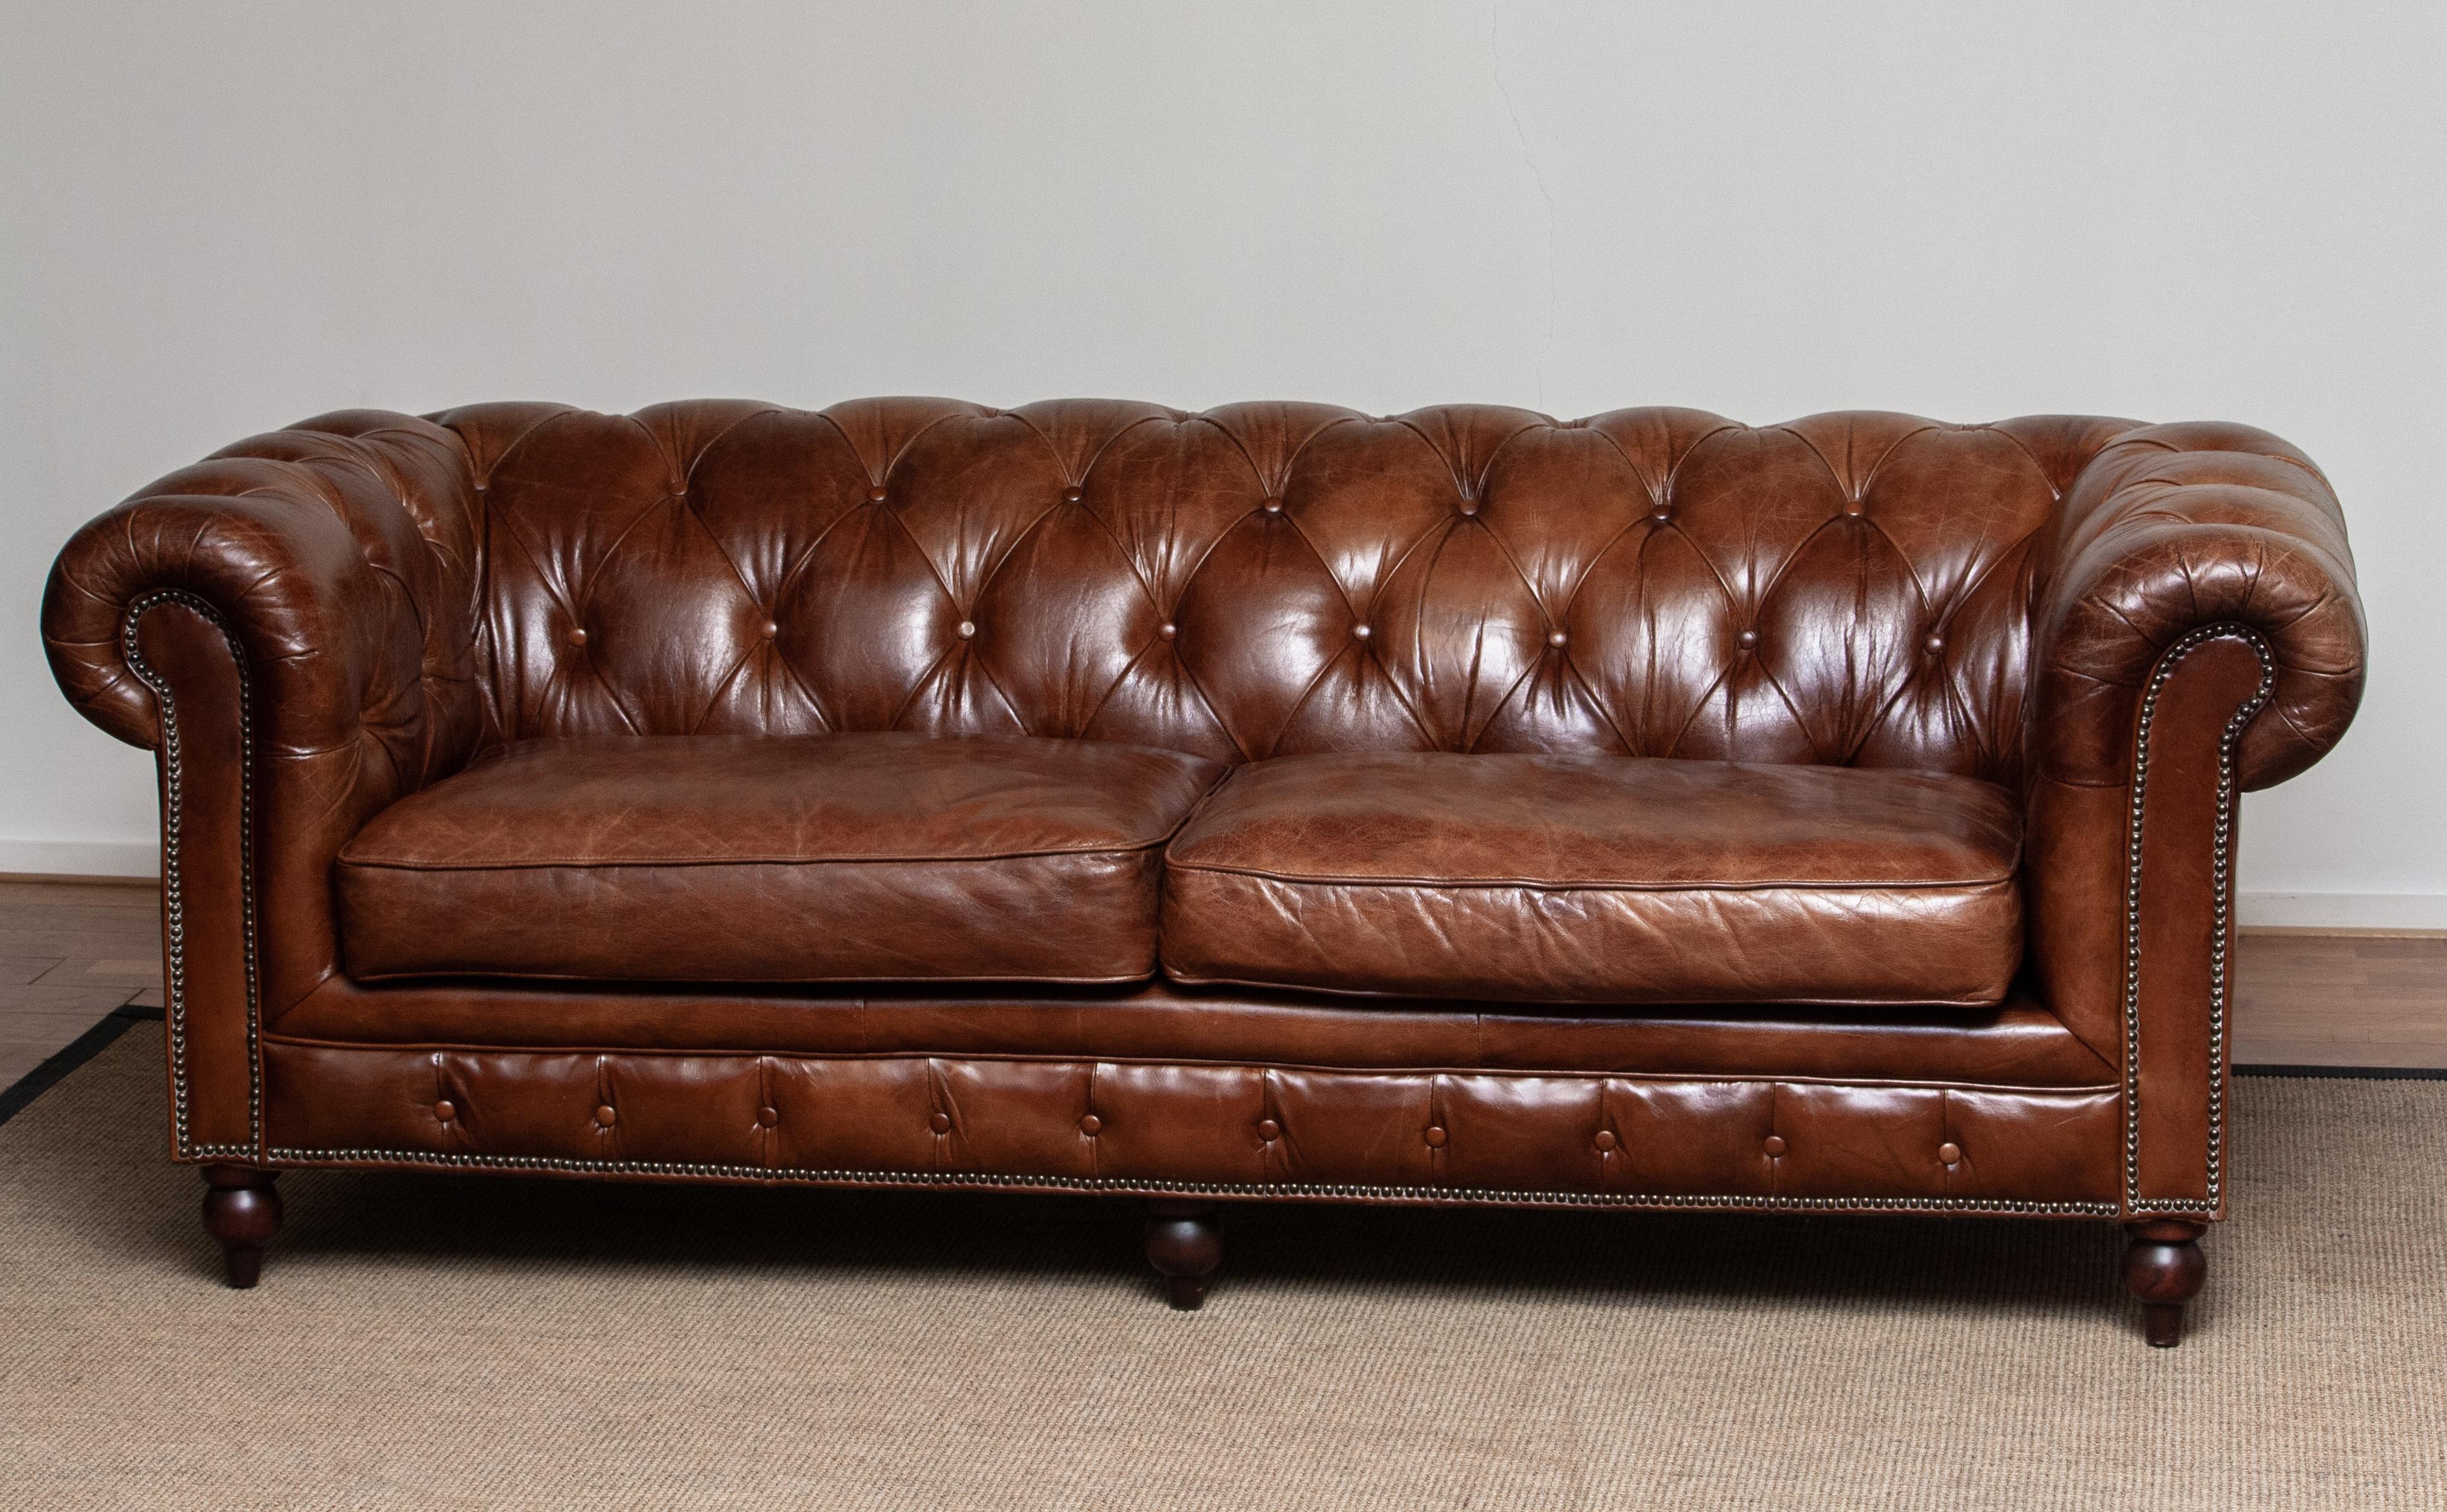 Tufted Brown Leather Chesterfield Sofa and Arm / Lounge Chair 7